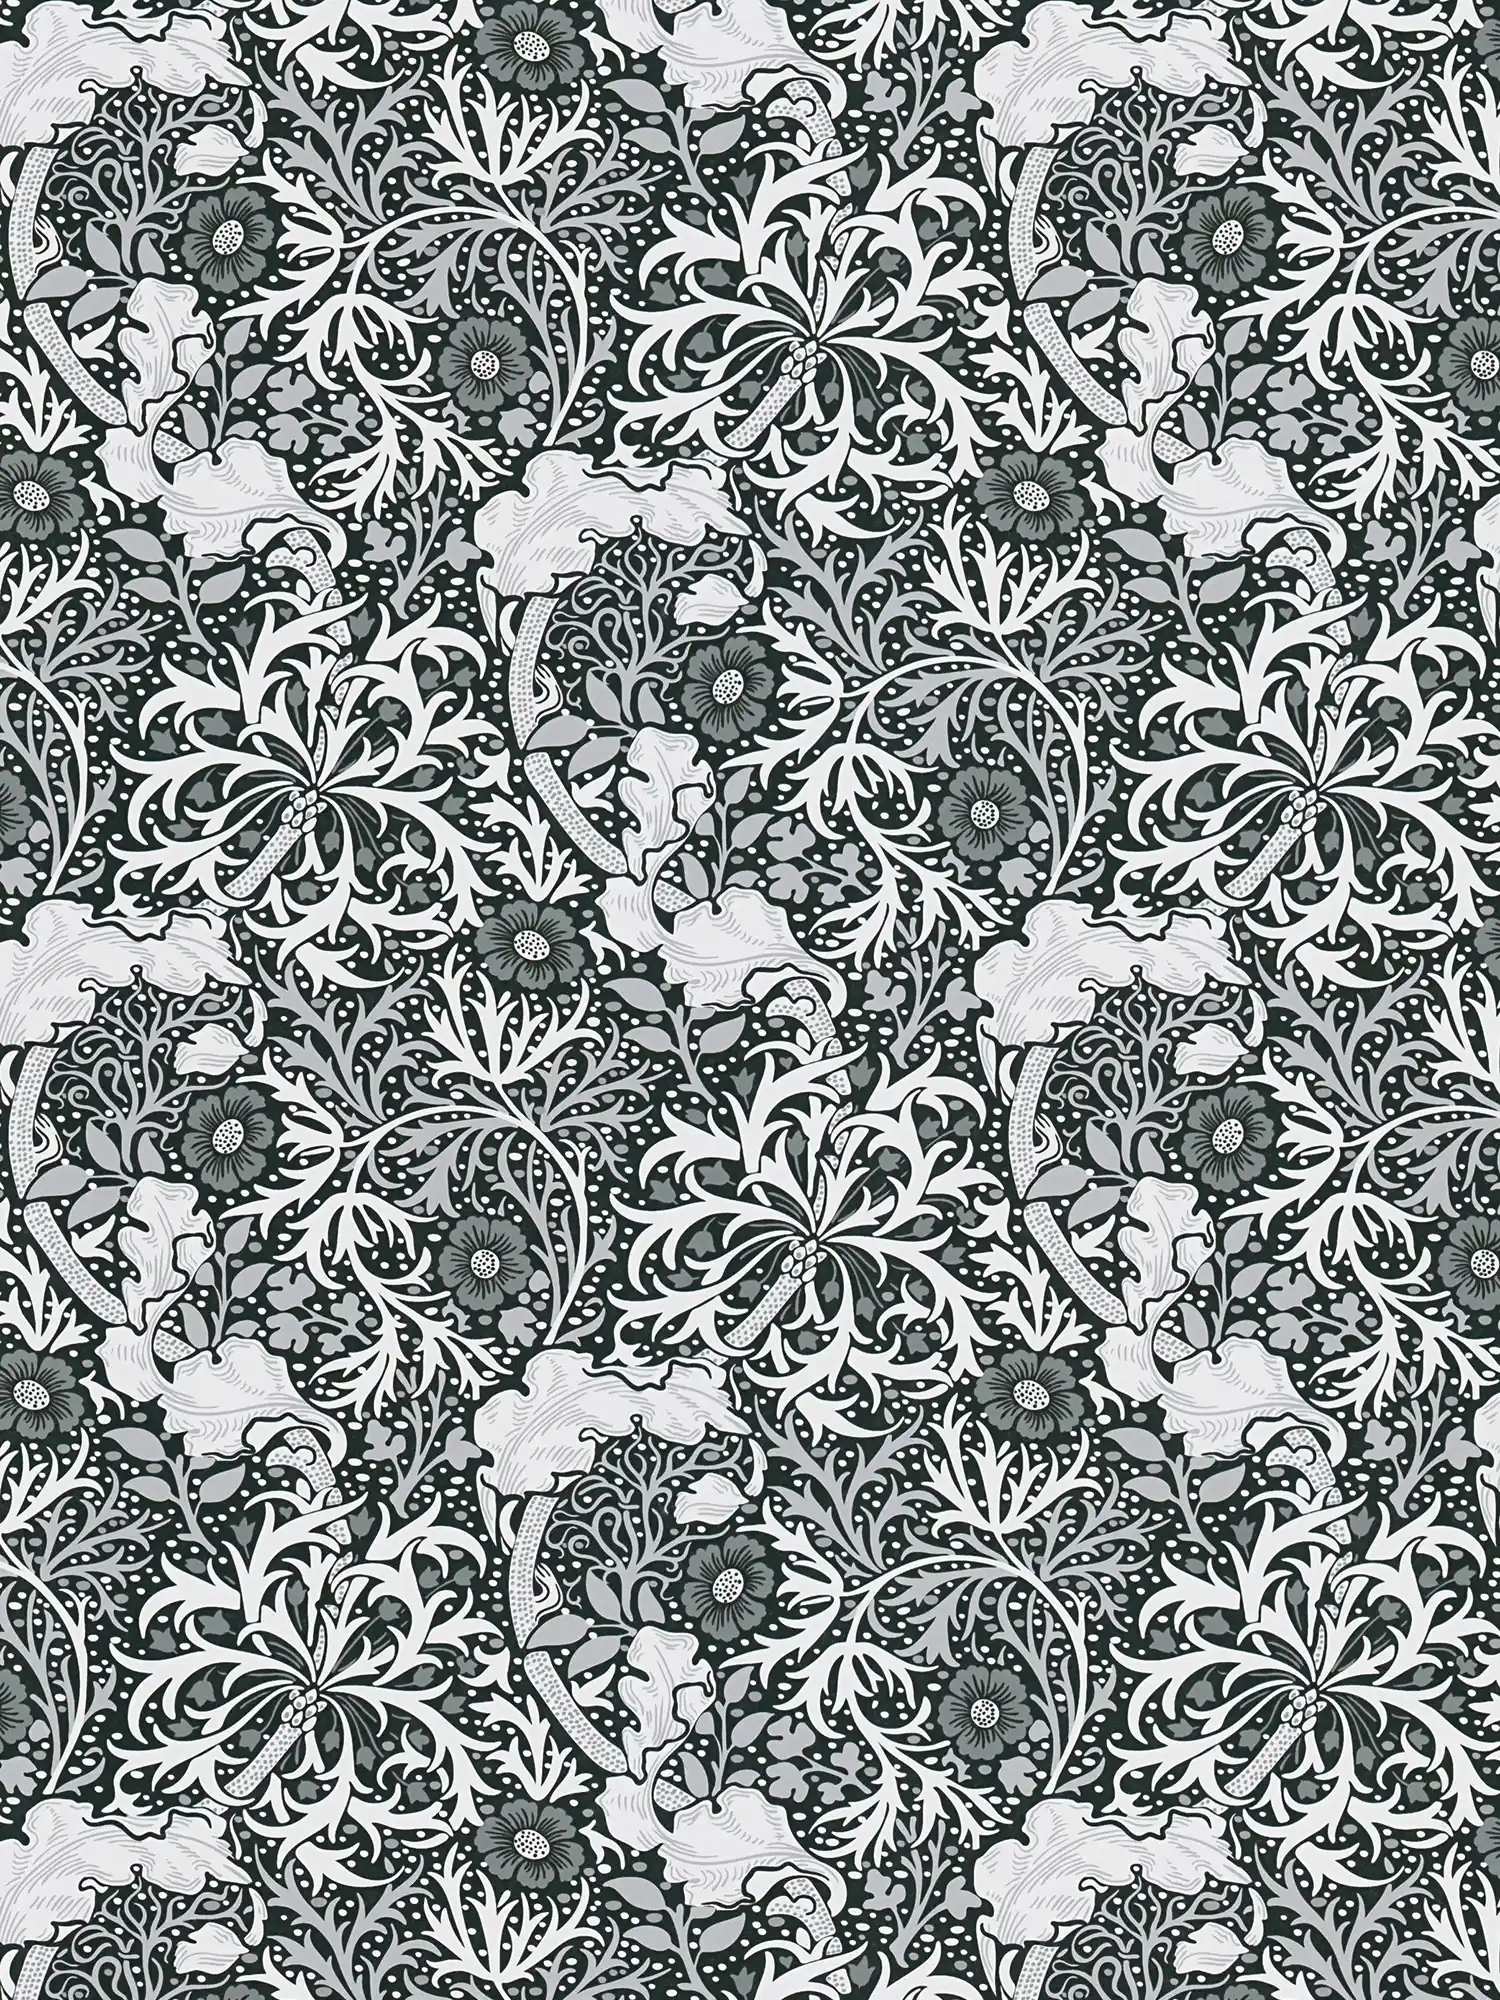 Non-woven wallpaper with floral pattern vines and flowers - white, black, grey
